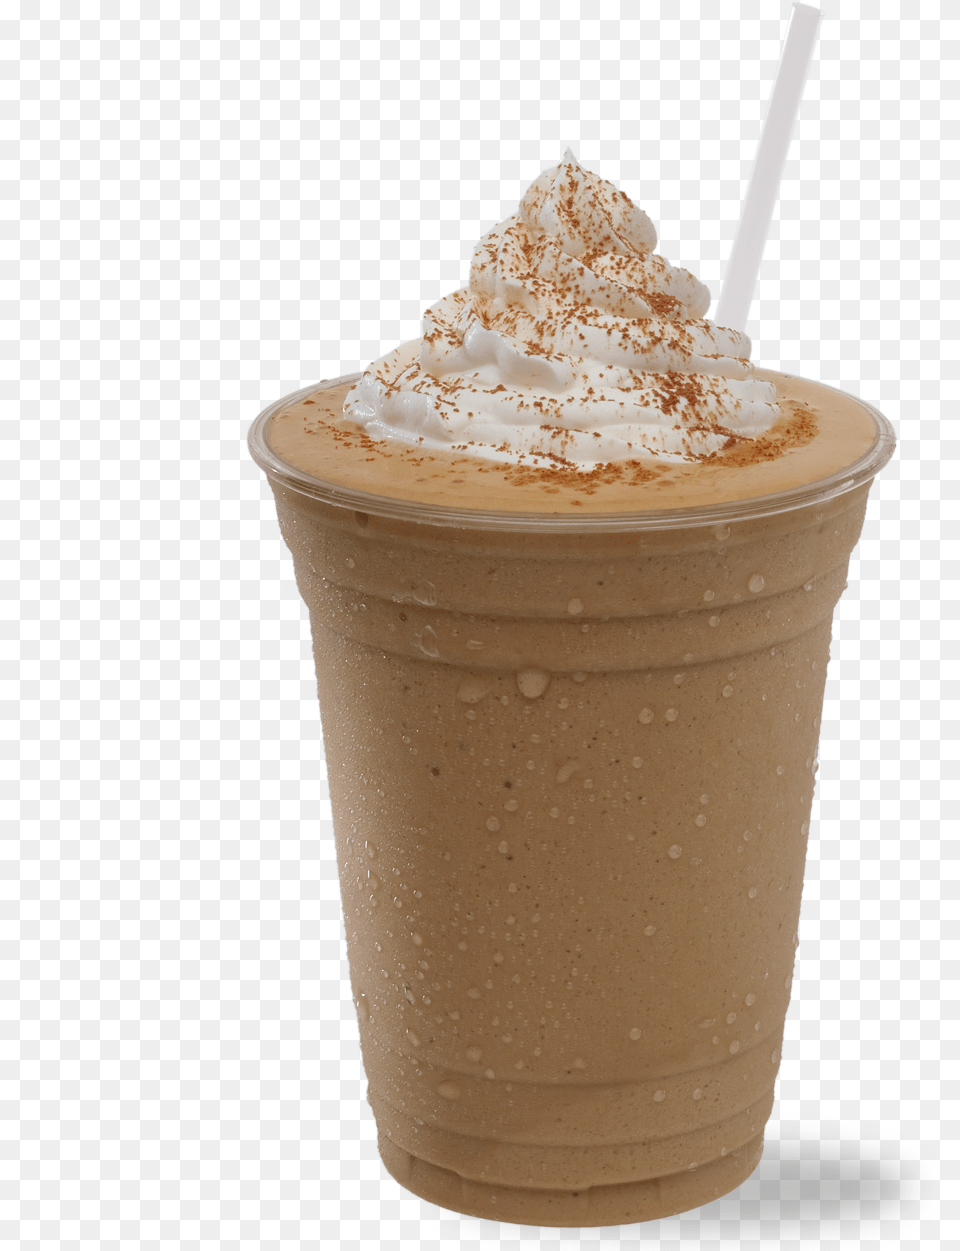 Organic Fair Trade Dominican Frappe Vector Background, Beverage, Milk, Cup, Juice Png Image